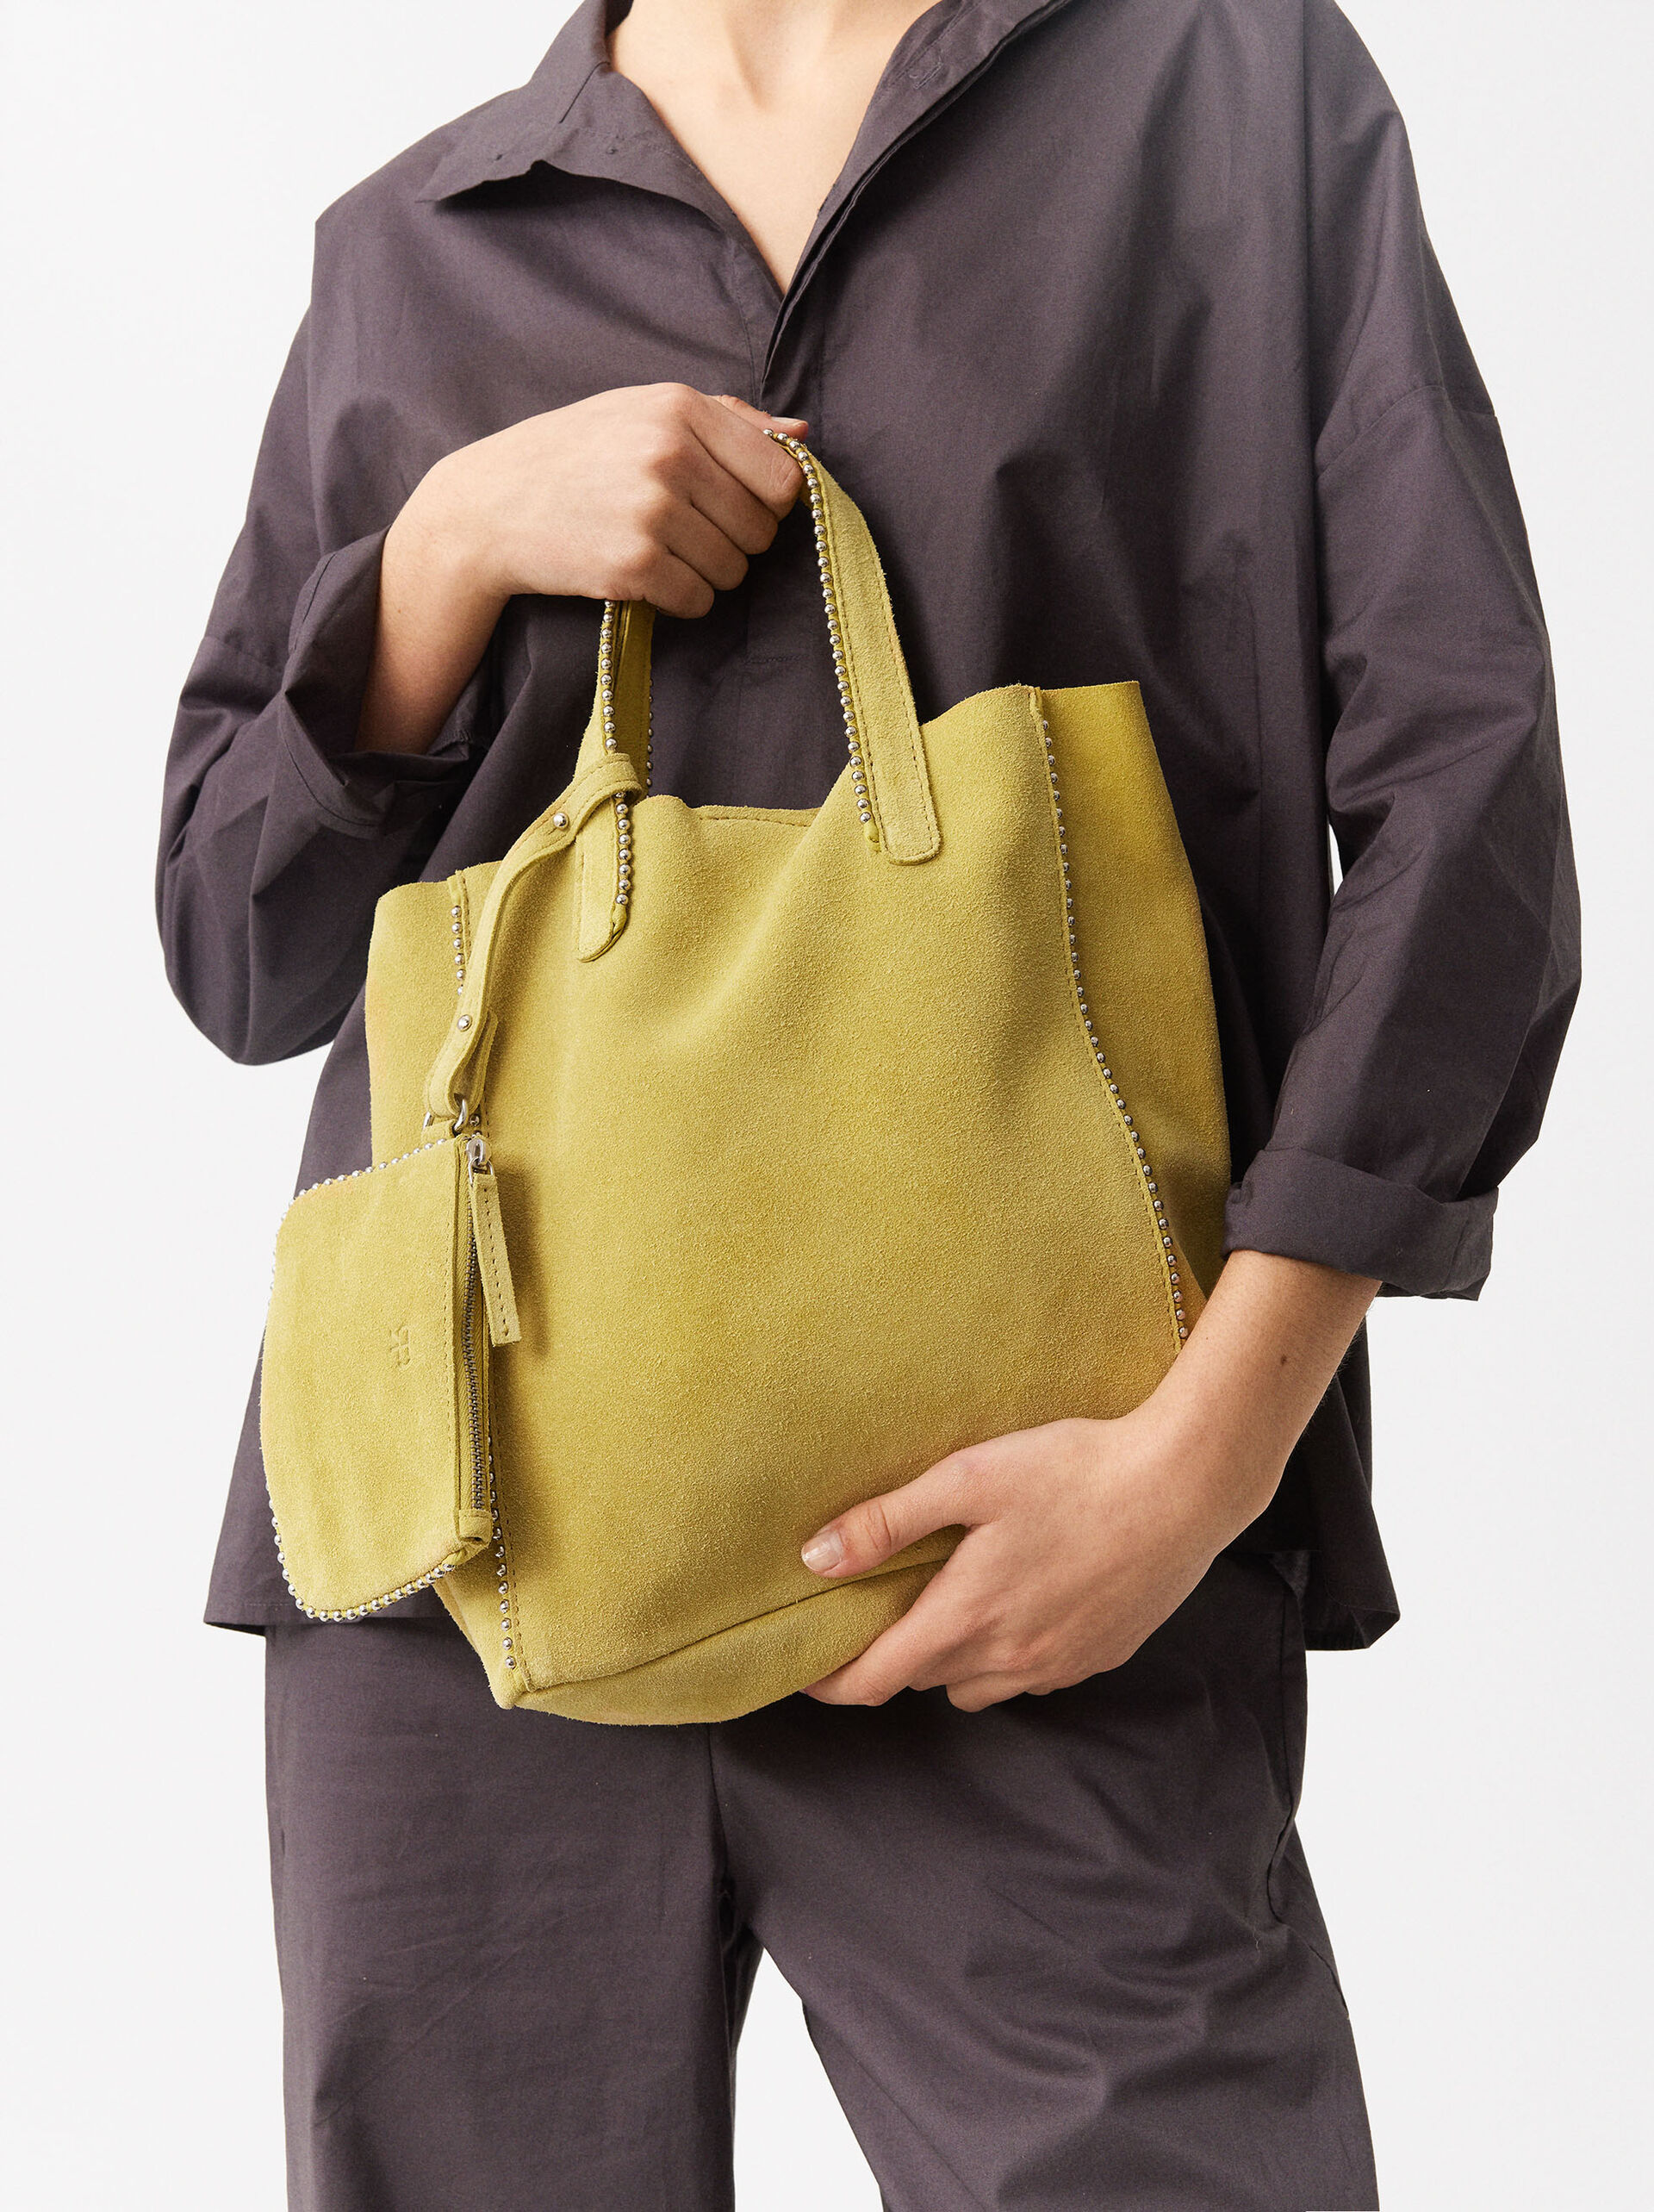 Leather Tote Bag With Pendant - Limited Edition image number 1.0